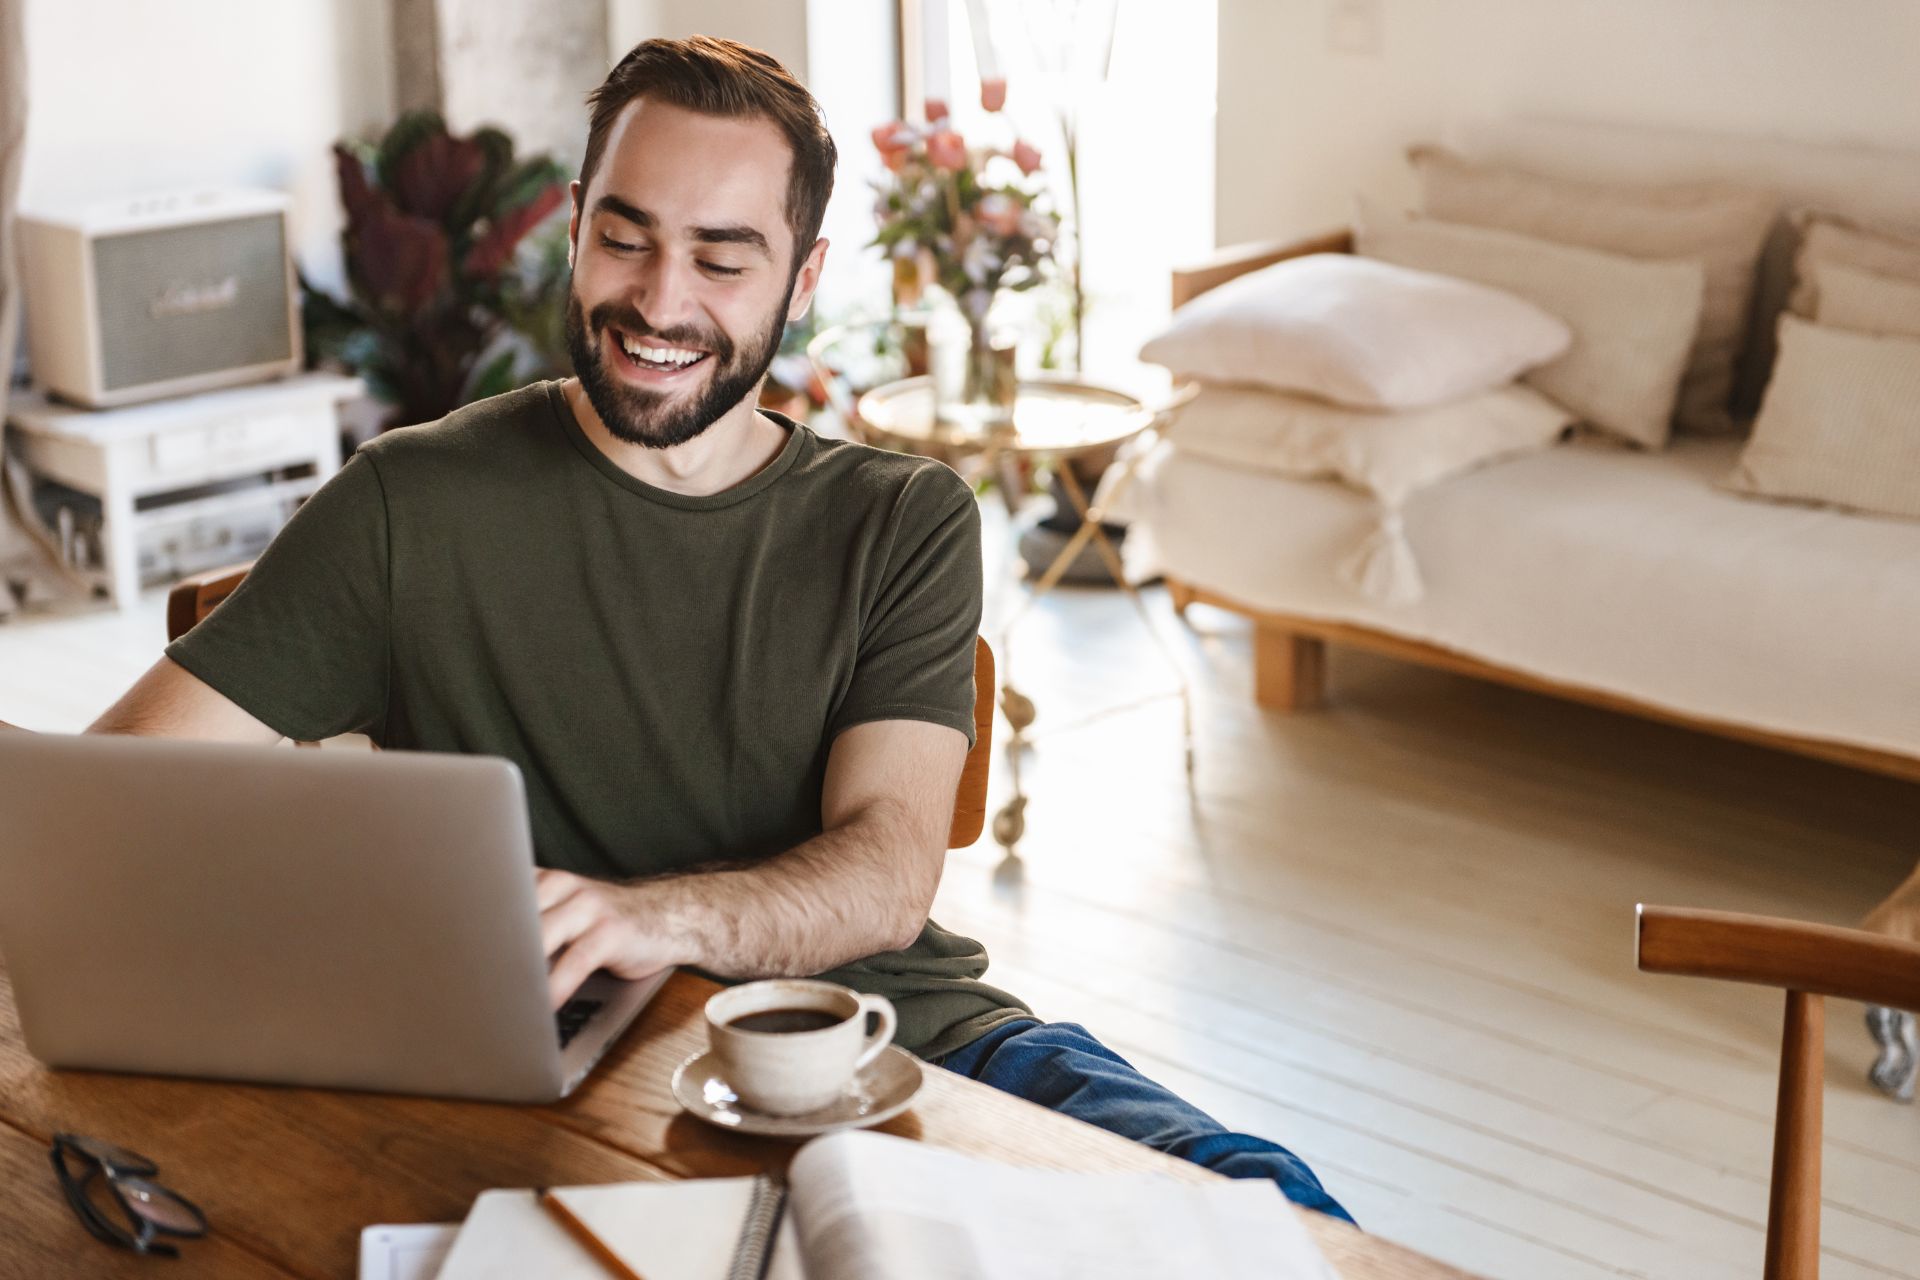 5 Common Myths About Working from Home- Uncovered and Debunked